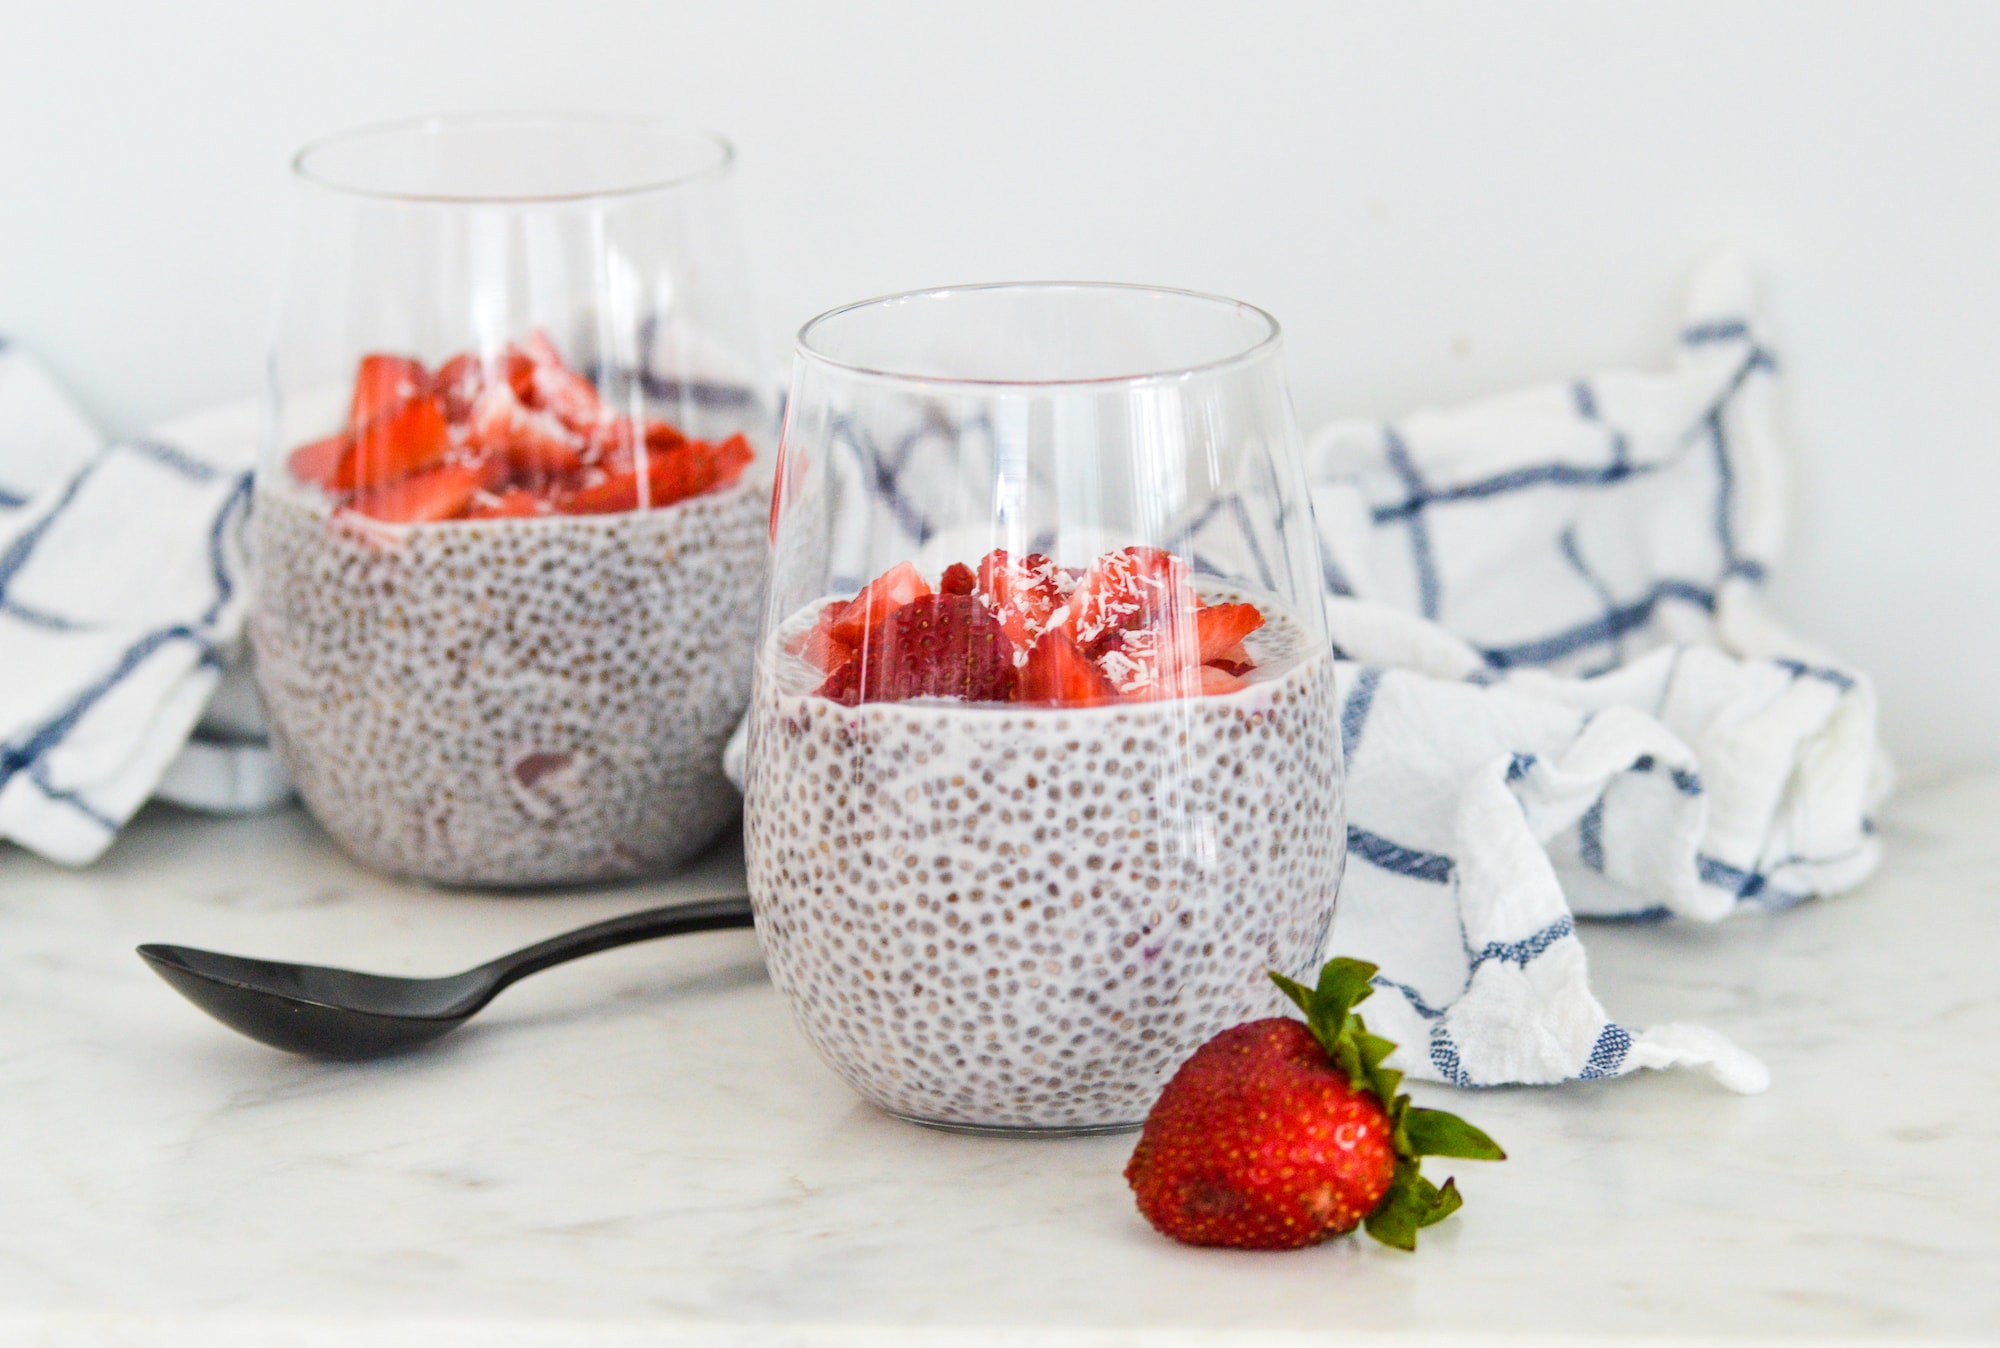 What Can I Add Chia Seeds To